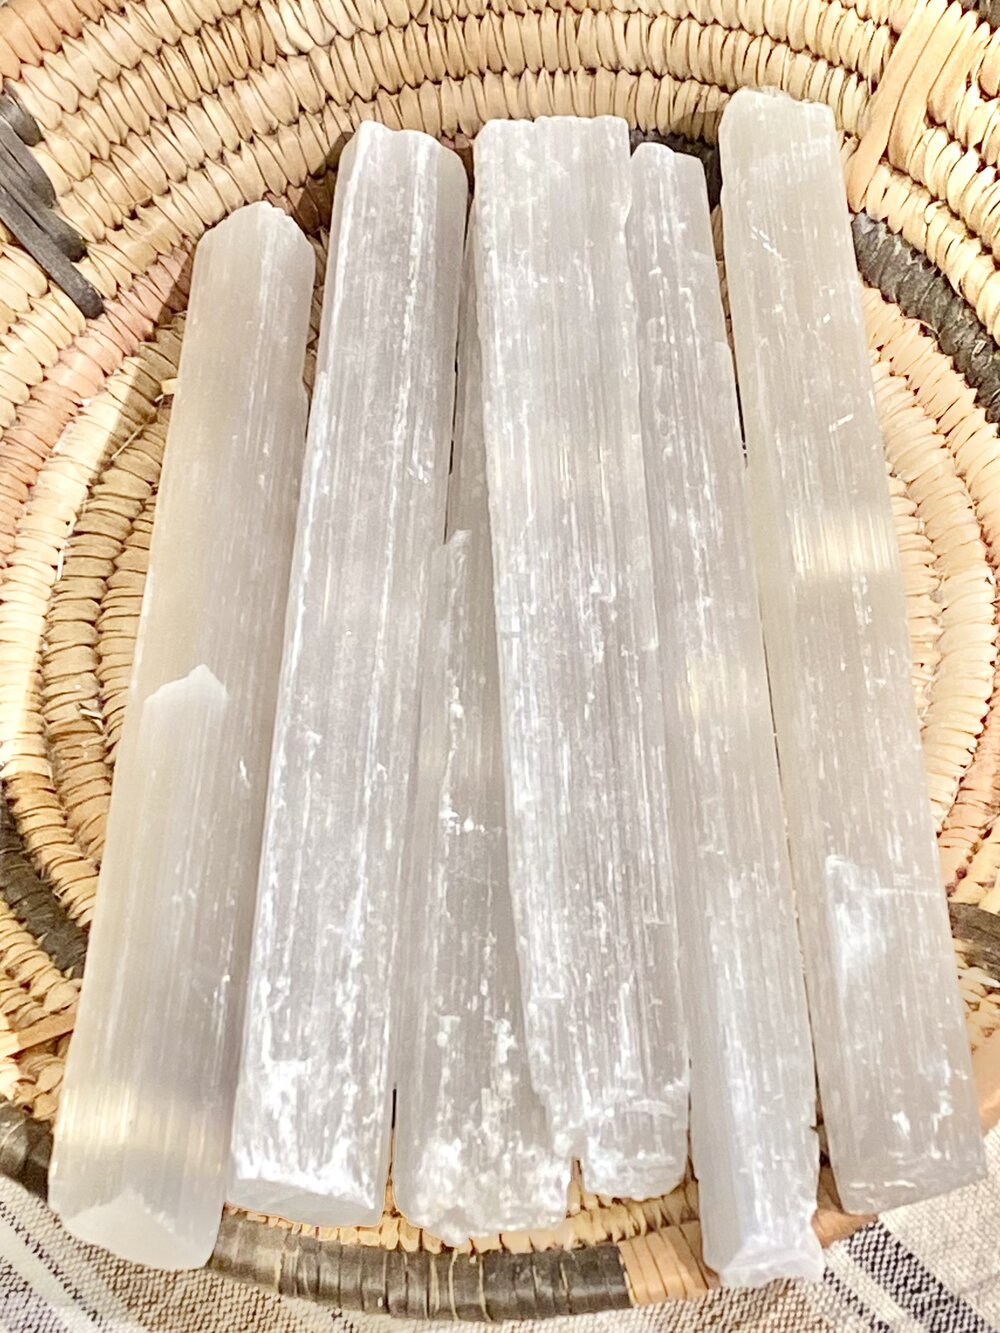 Learn About Selenite